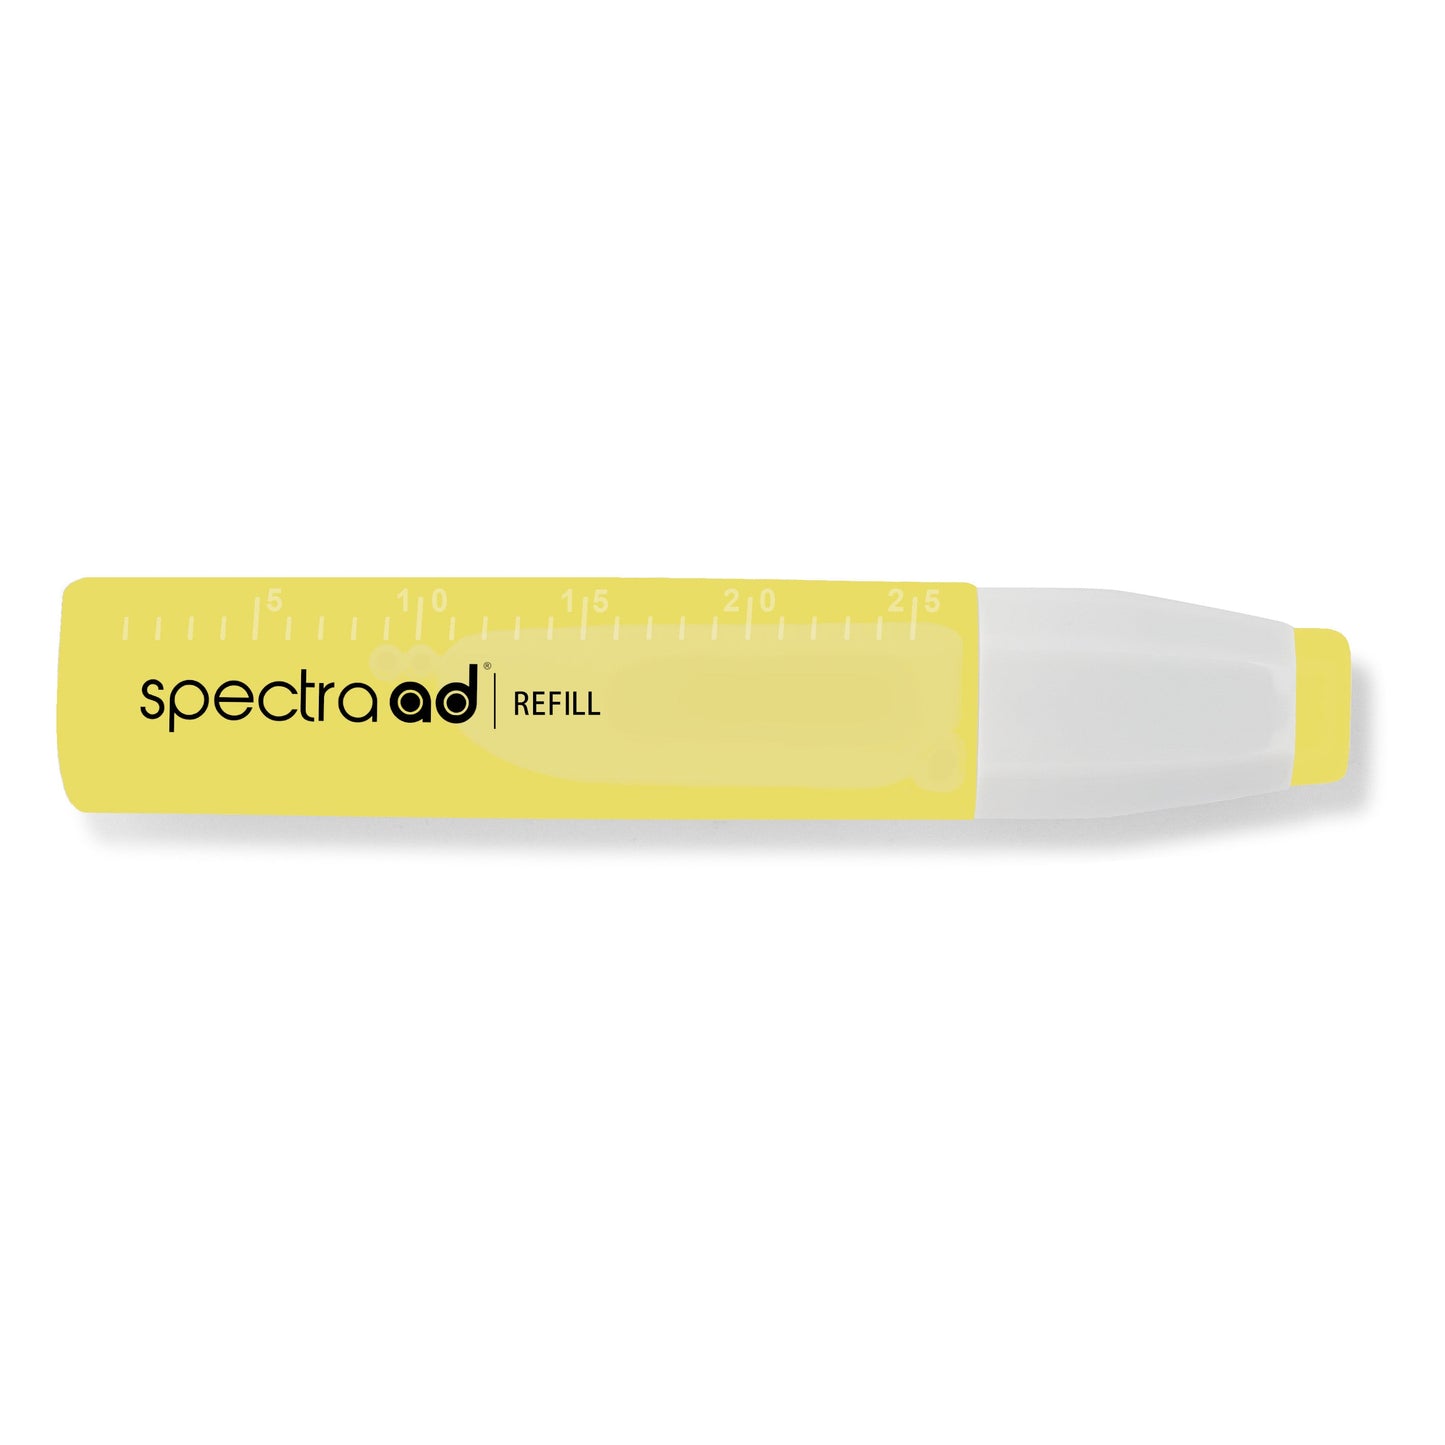 014 - Canary Yellow - Spectra AD Refill Bottle